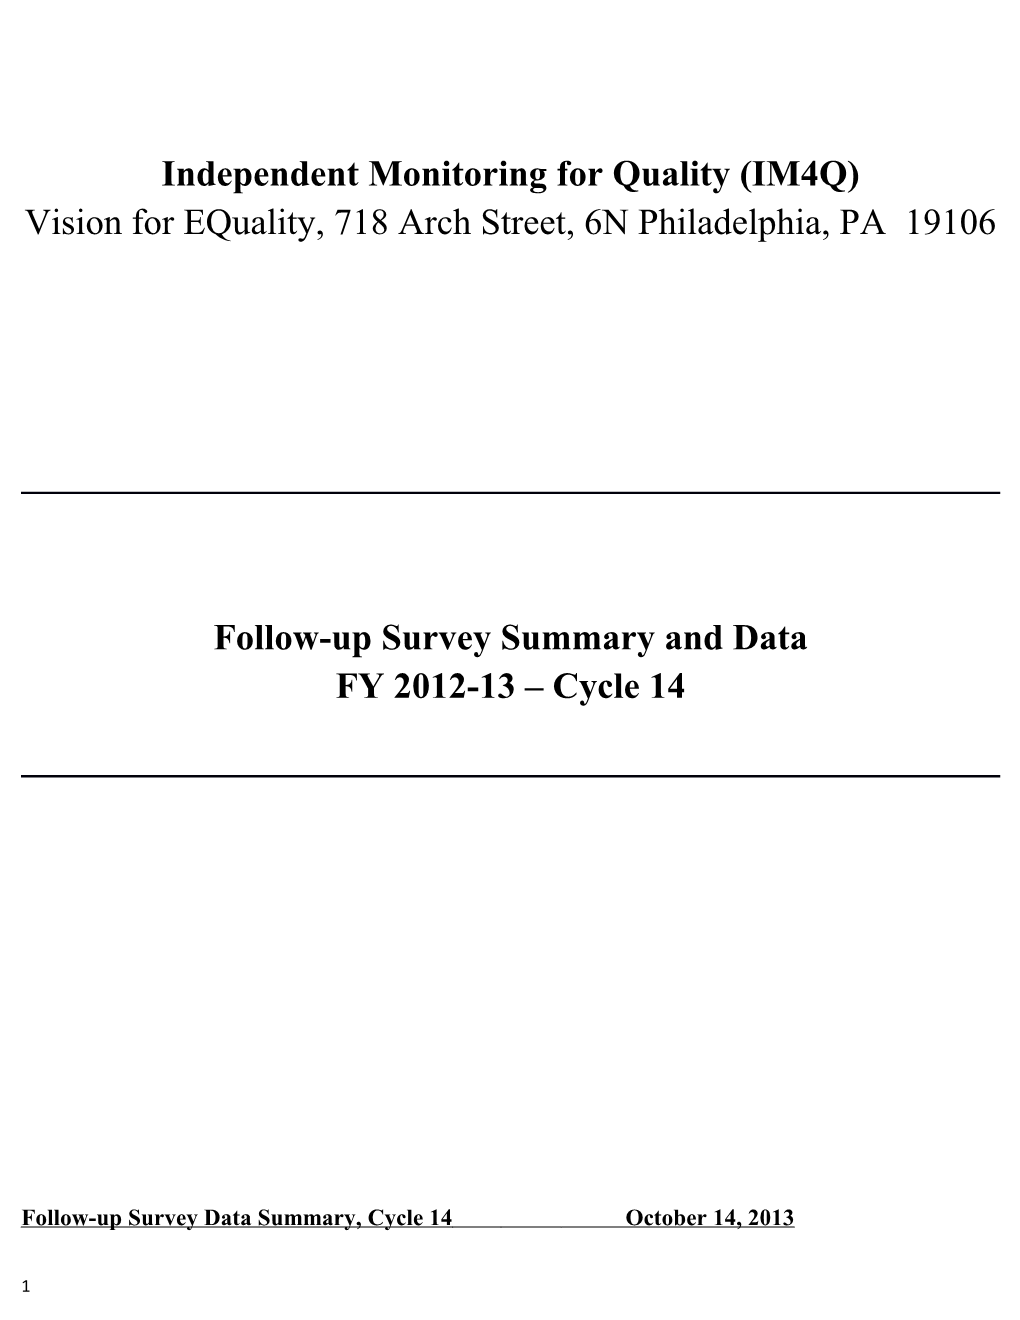 Follow-Up Survey Summary and Data FY 2012-13 Cycle 14